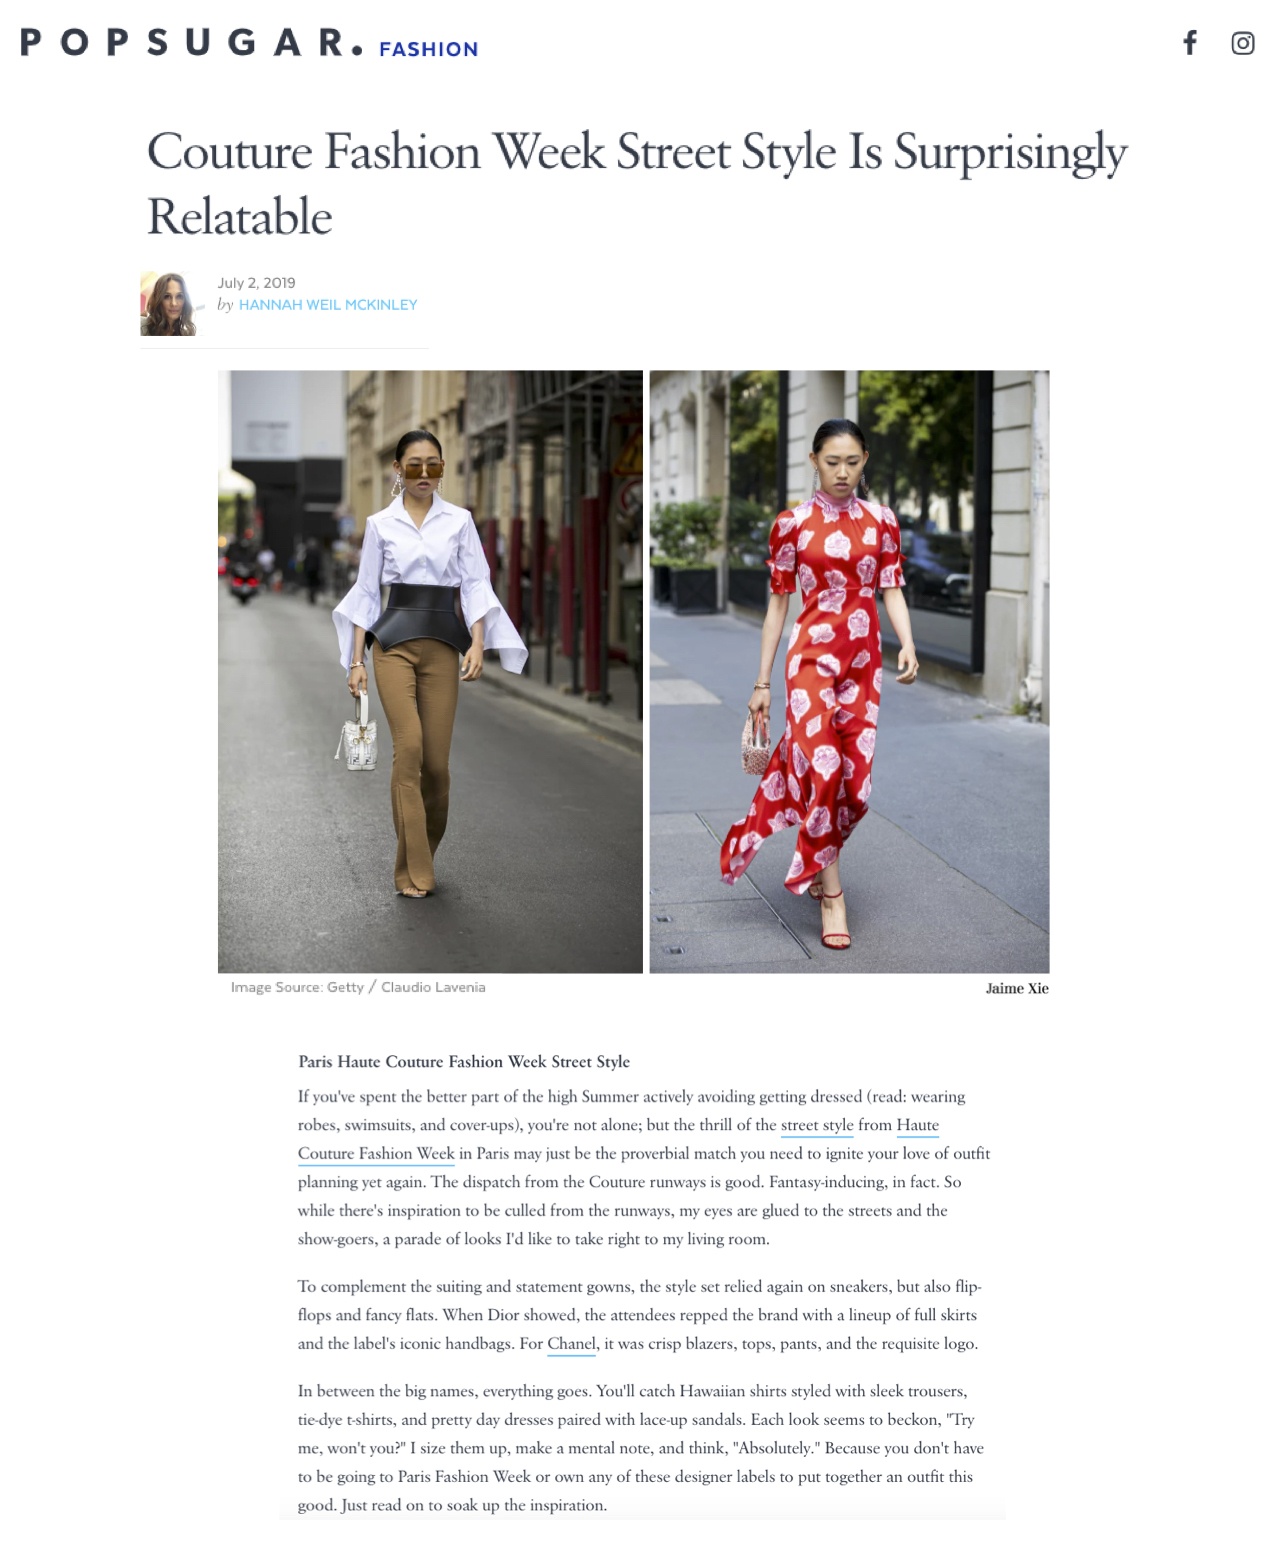 Popsugar: Couture Fashion Week Street Style Is Surprisingly Relatable